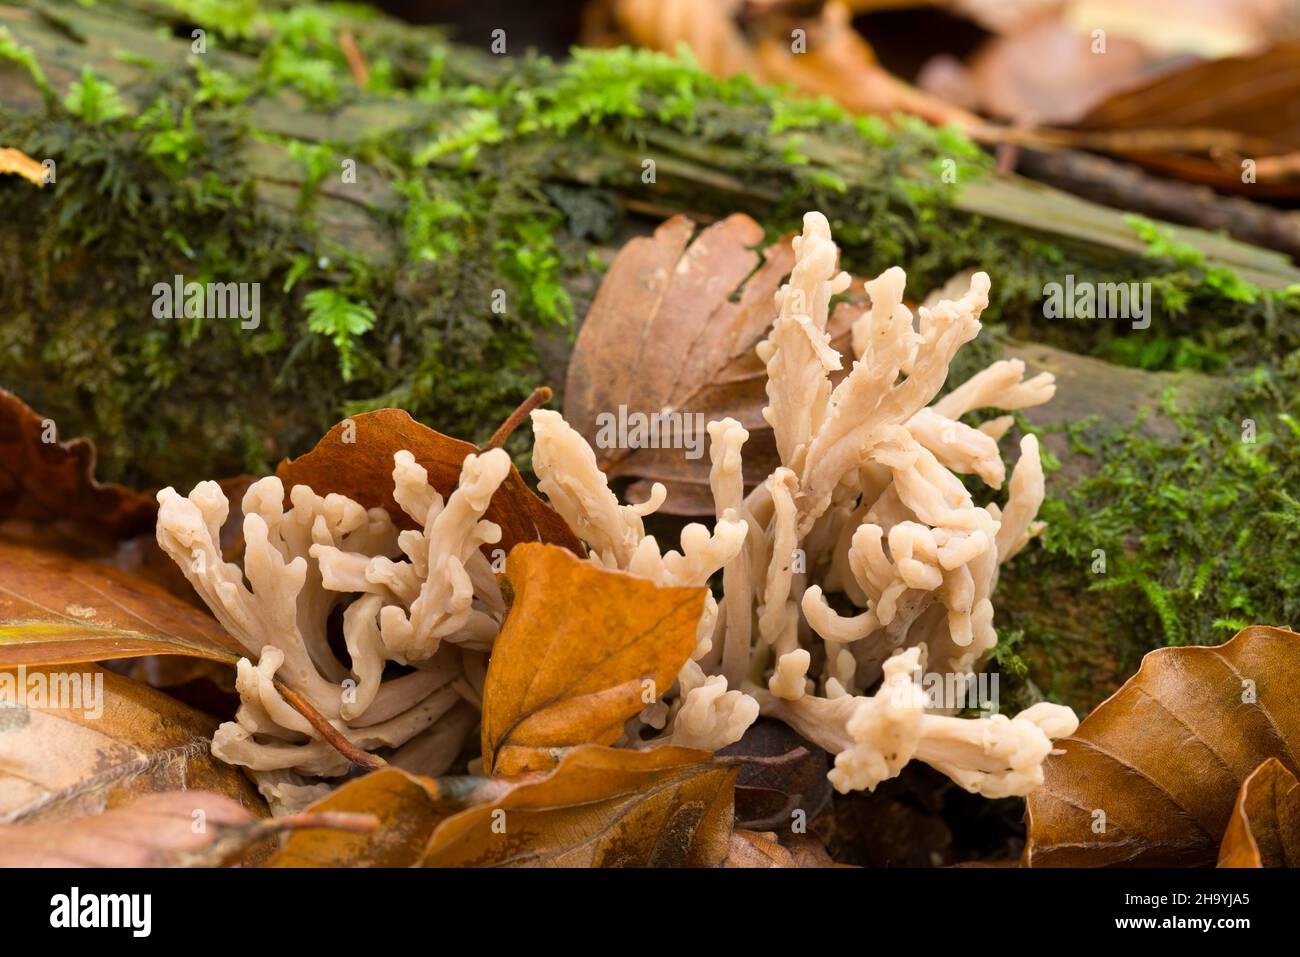 White Coral fungus (Clavulina coralloides also known as Clavulina cristata) in the leaf litter of a beech woodland at Goblin Combe, North Somerset, England. Stock Photo